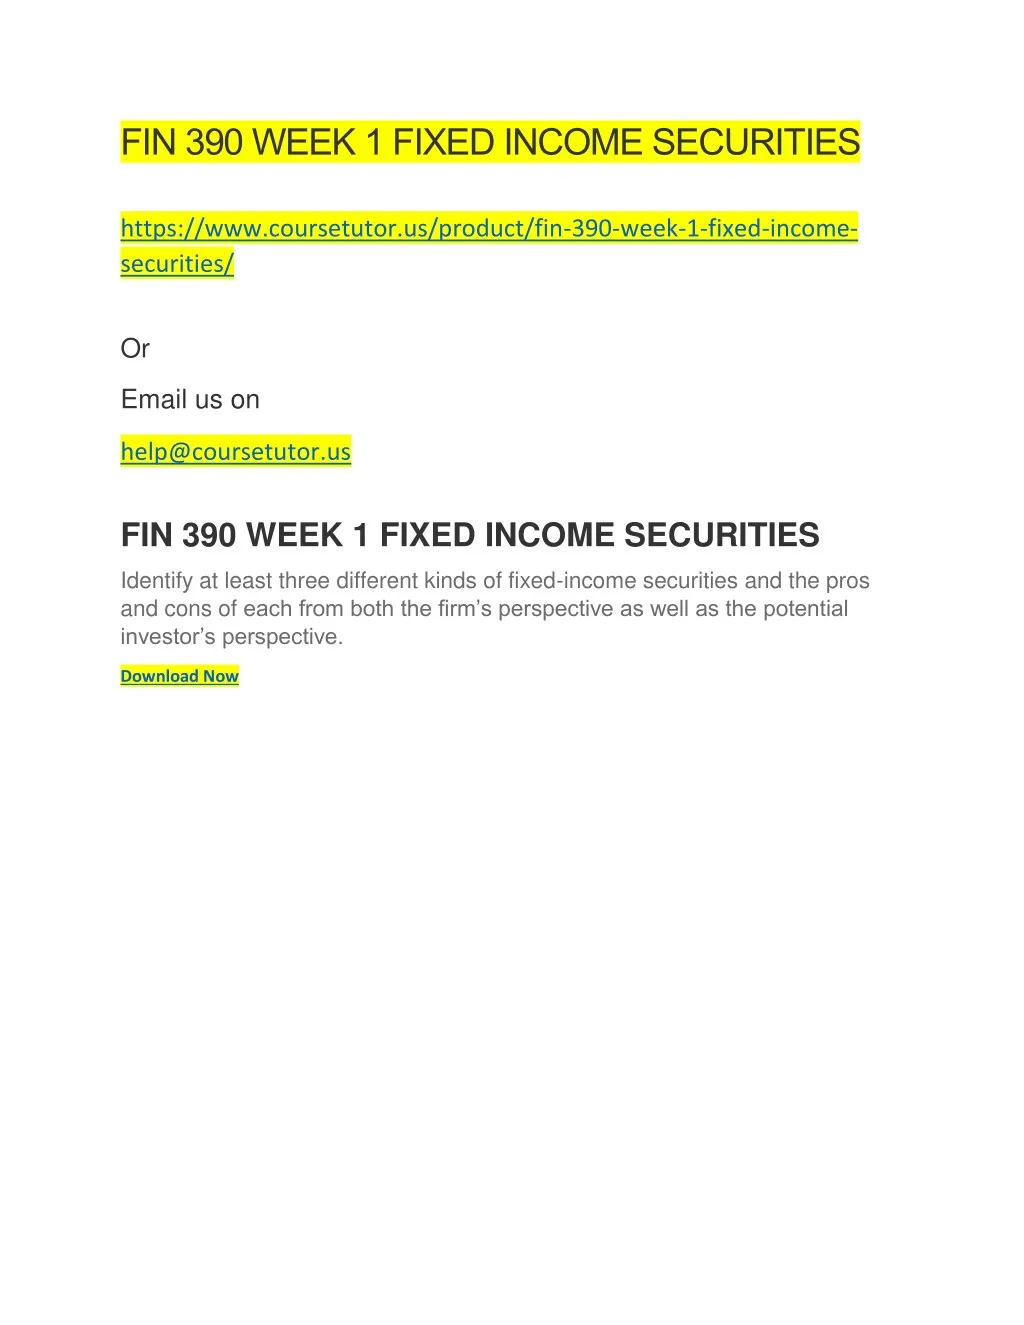 fin 390 week 1 fixed income securities